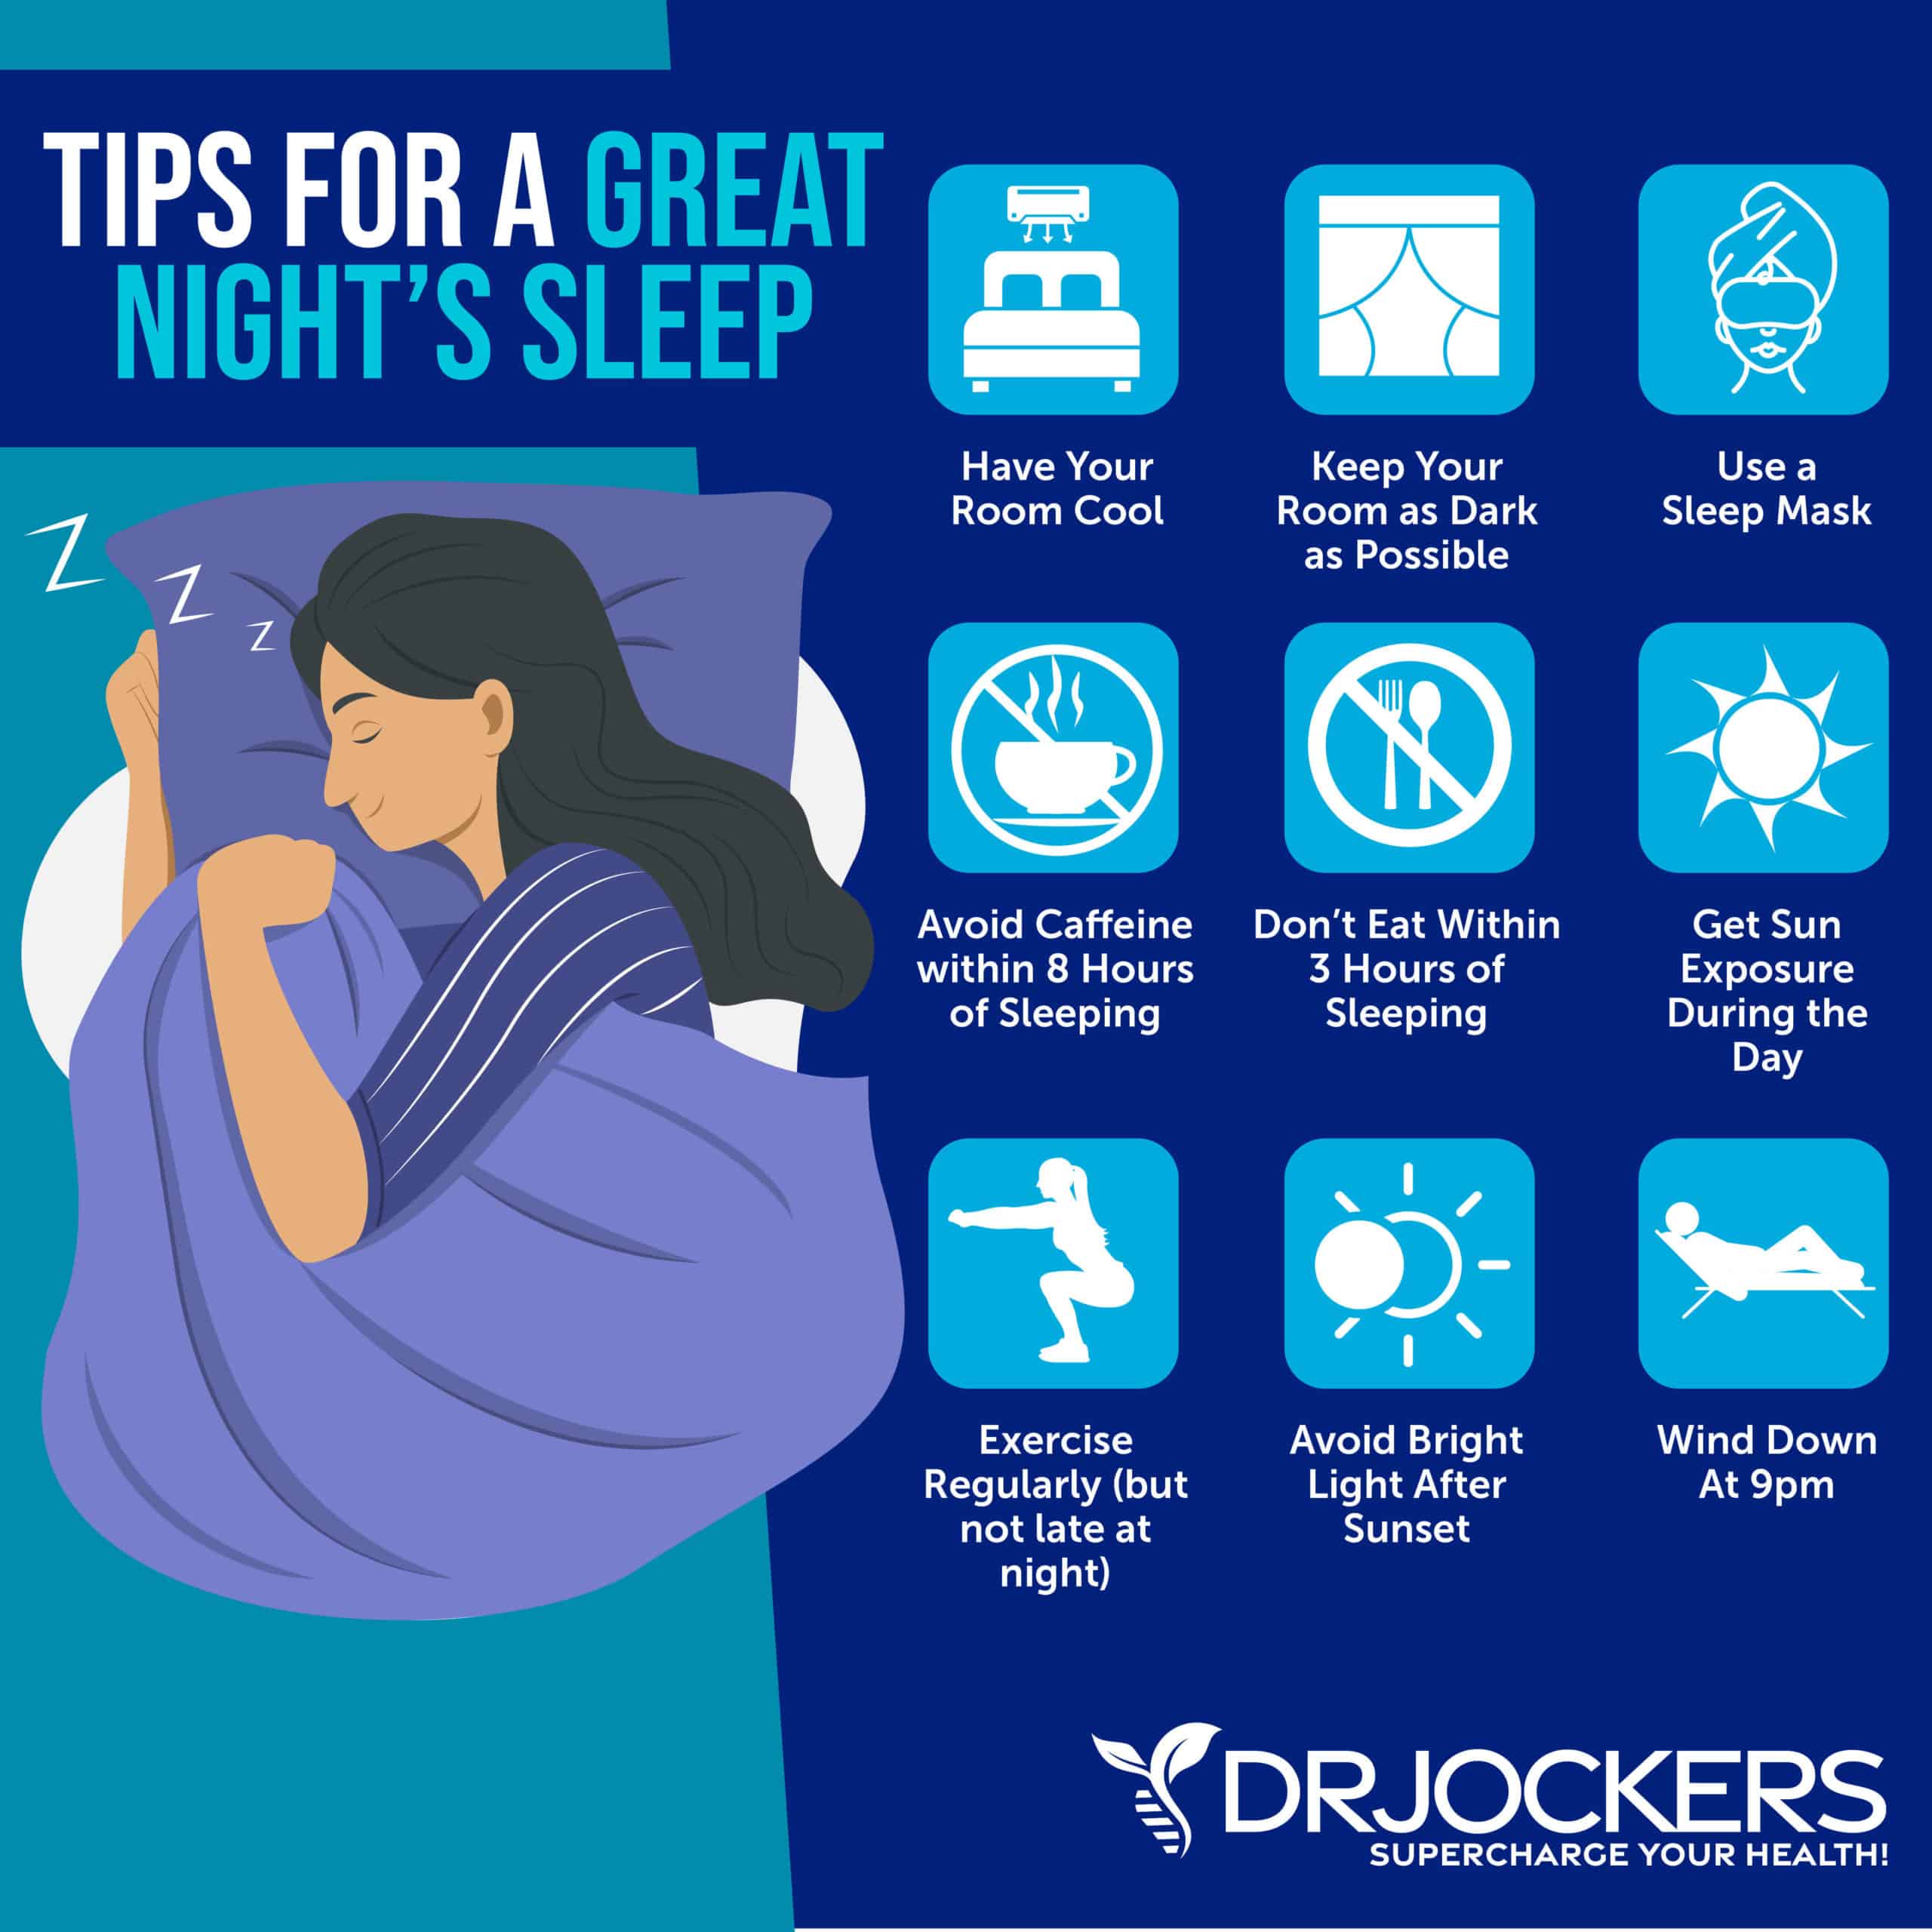 deep sleep, Deep Sleep: What Is It and How to Measure and Optimize It